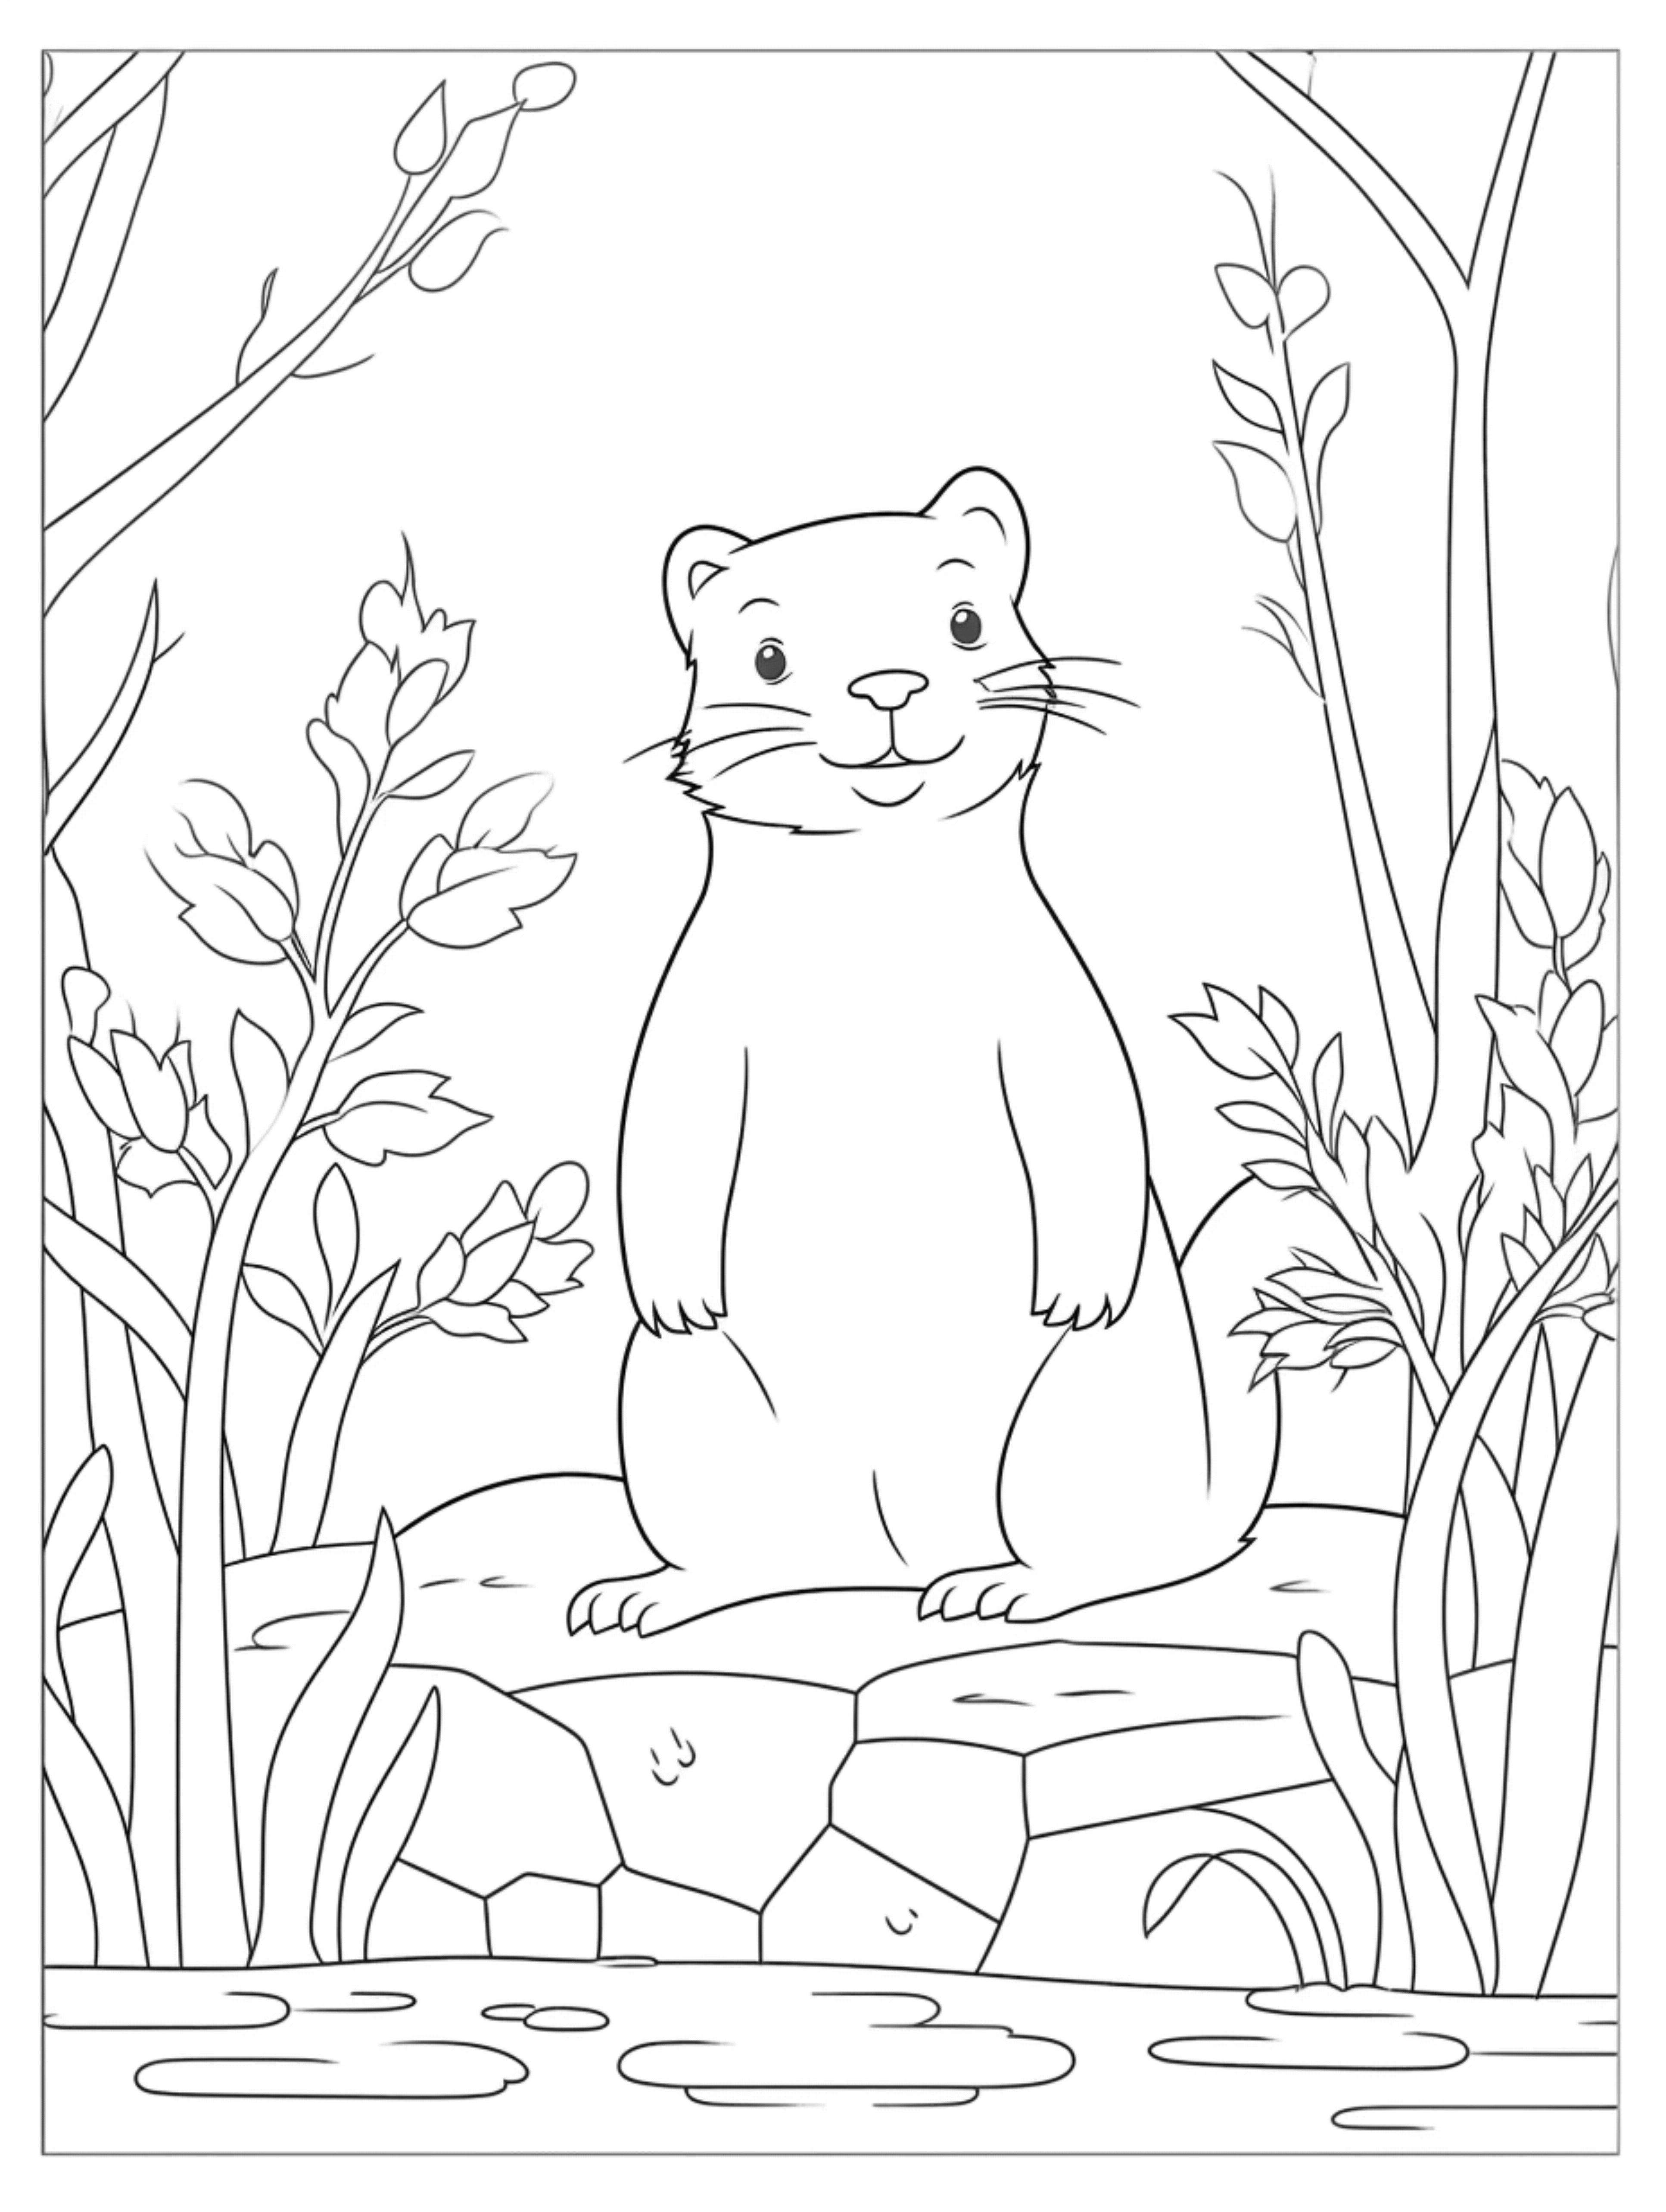 beaver coloring page